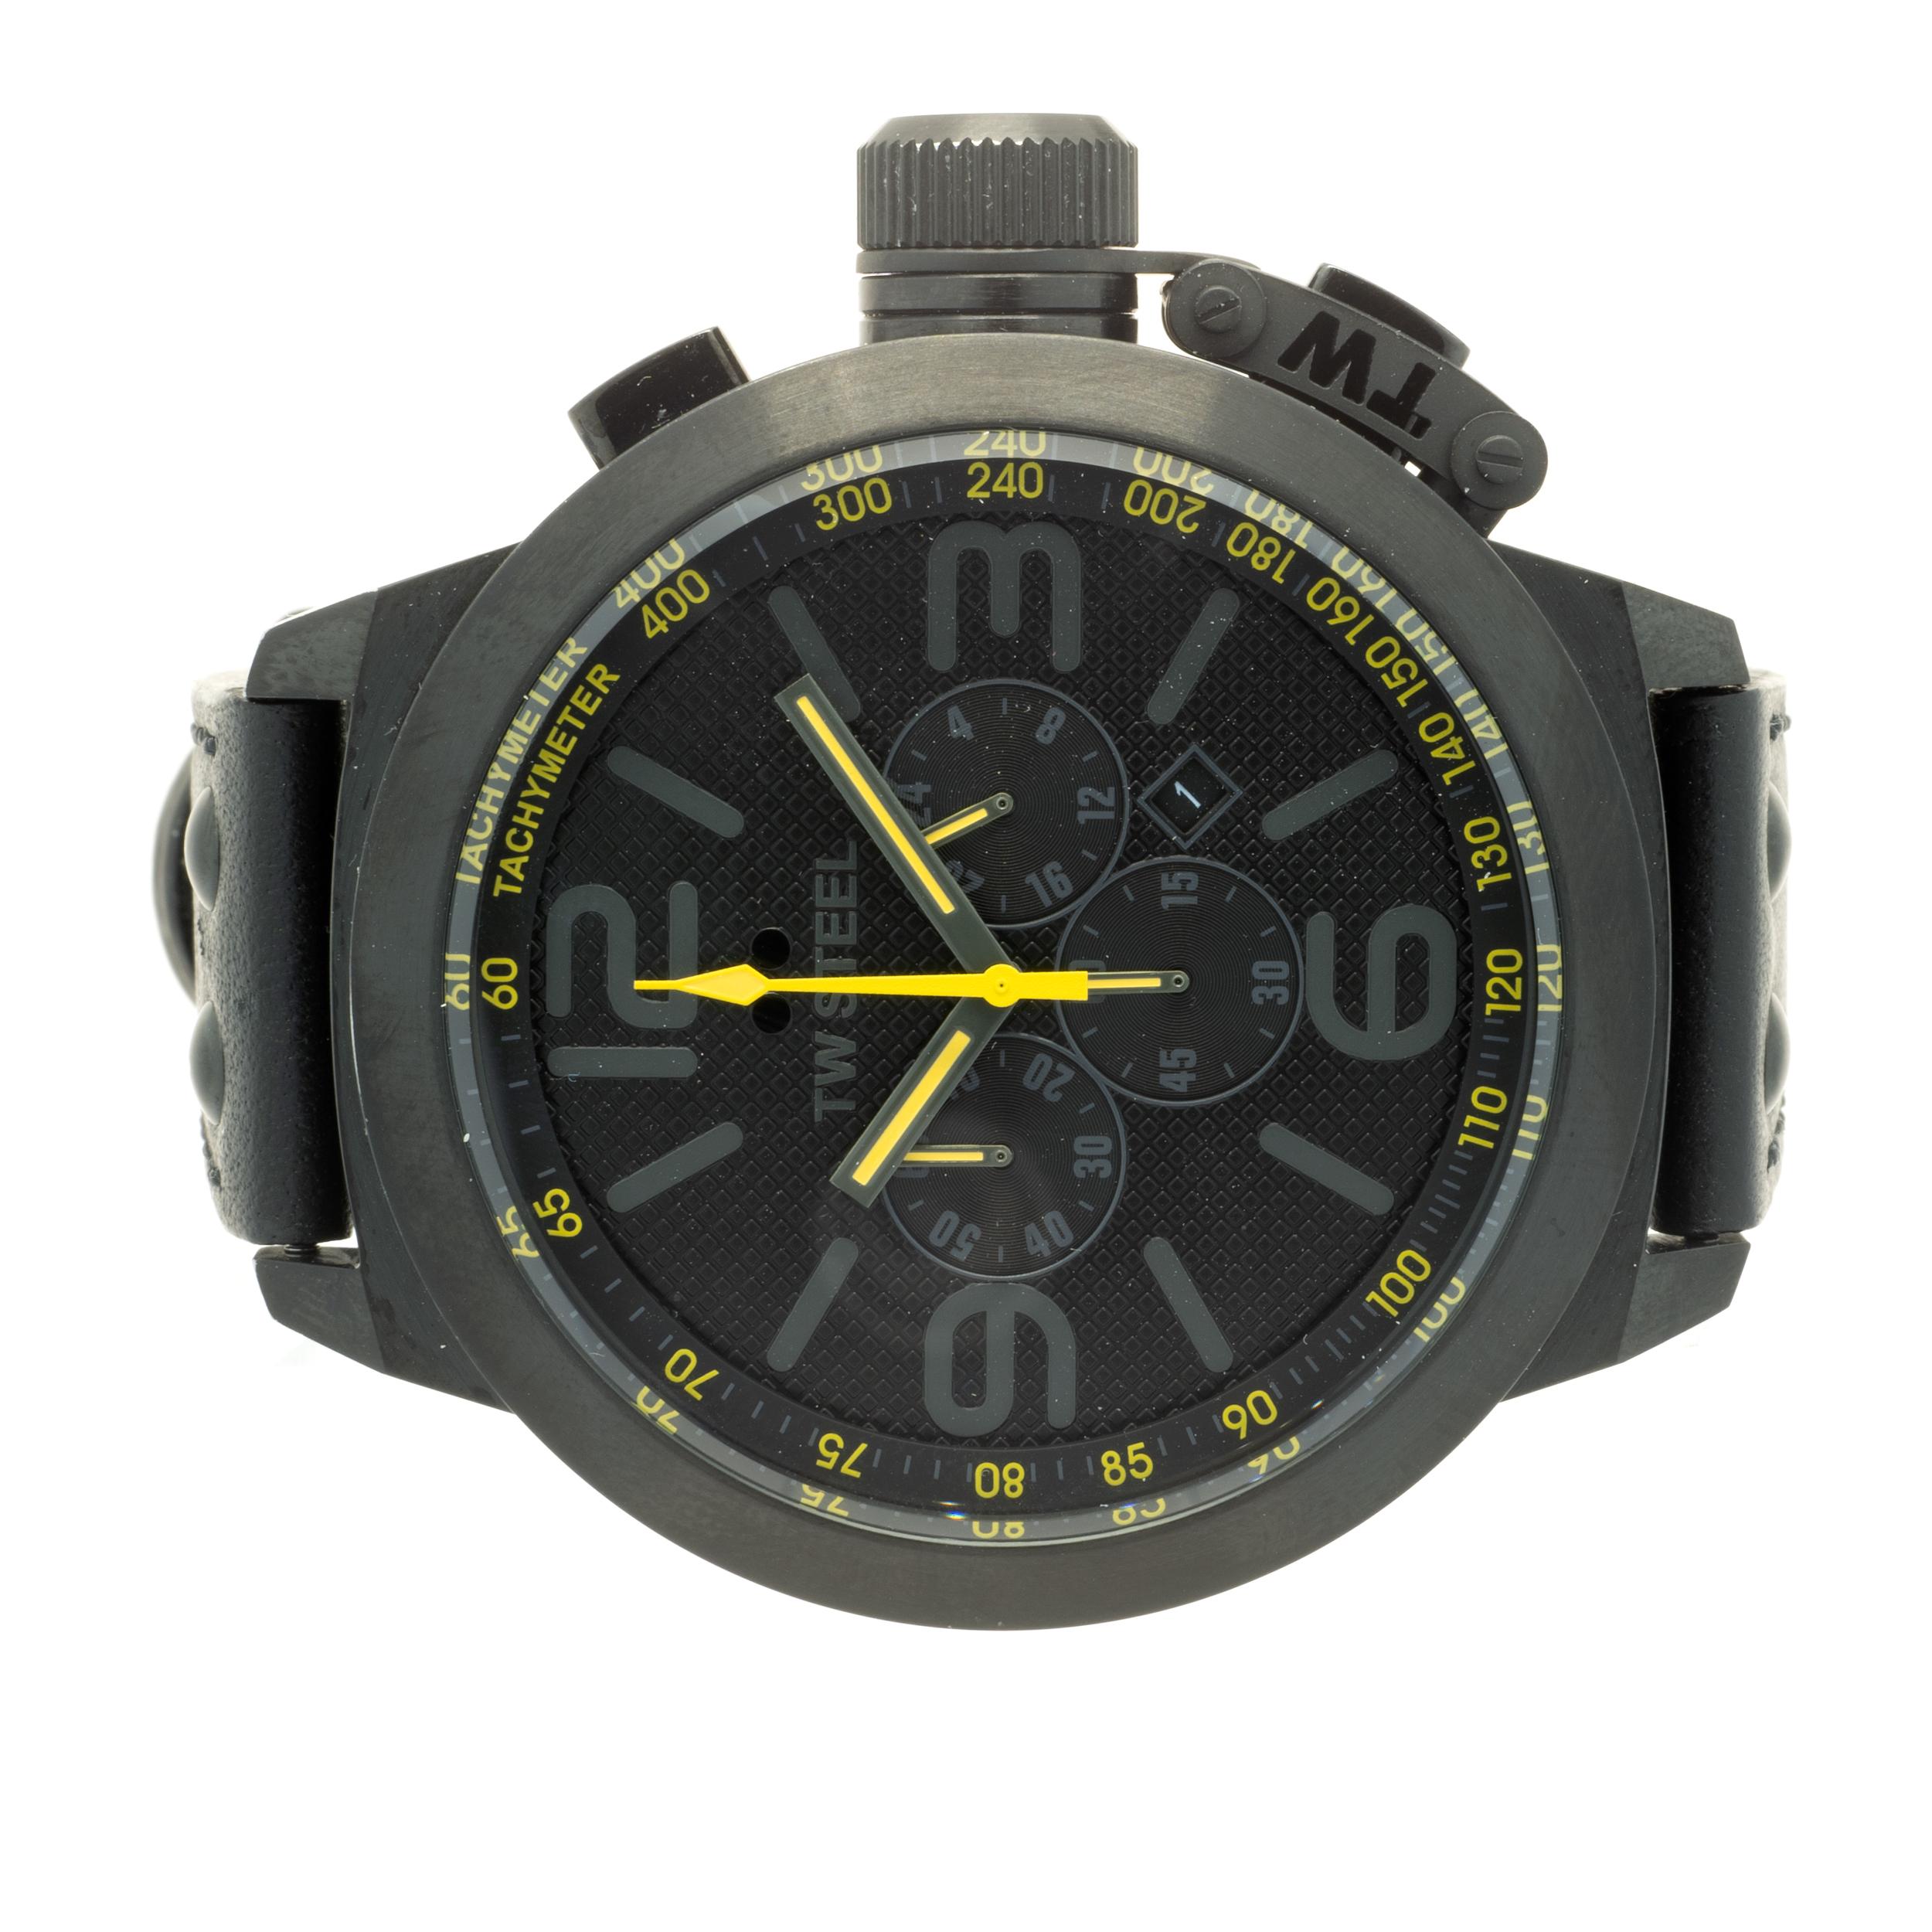 Movement: quartz
Function: hours, minutes, seconds, date, Chrono
Case: 50mm Black PVD Stainless Steel
Bracelet: black calfskin leather strap with buckle 
Dial: black Chrono dial, yellow second, and Chrono hands
Reference #: TW901R
 


Complete with